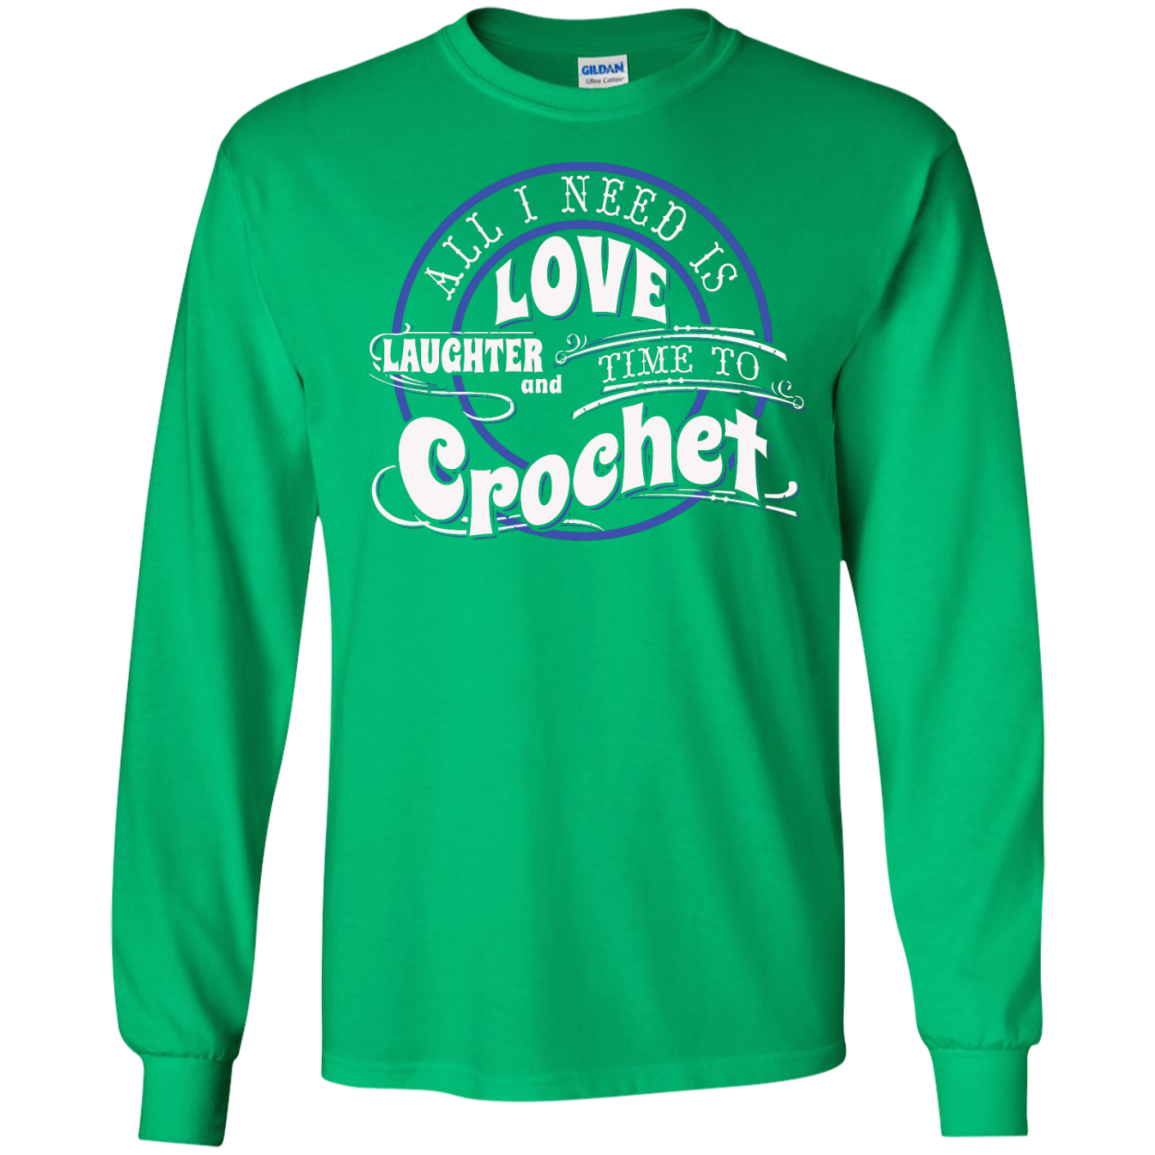 Time to Crochet Long Sleeve Ultra Cotton T-Shirt - Crafter4Life - 1